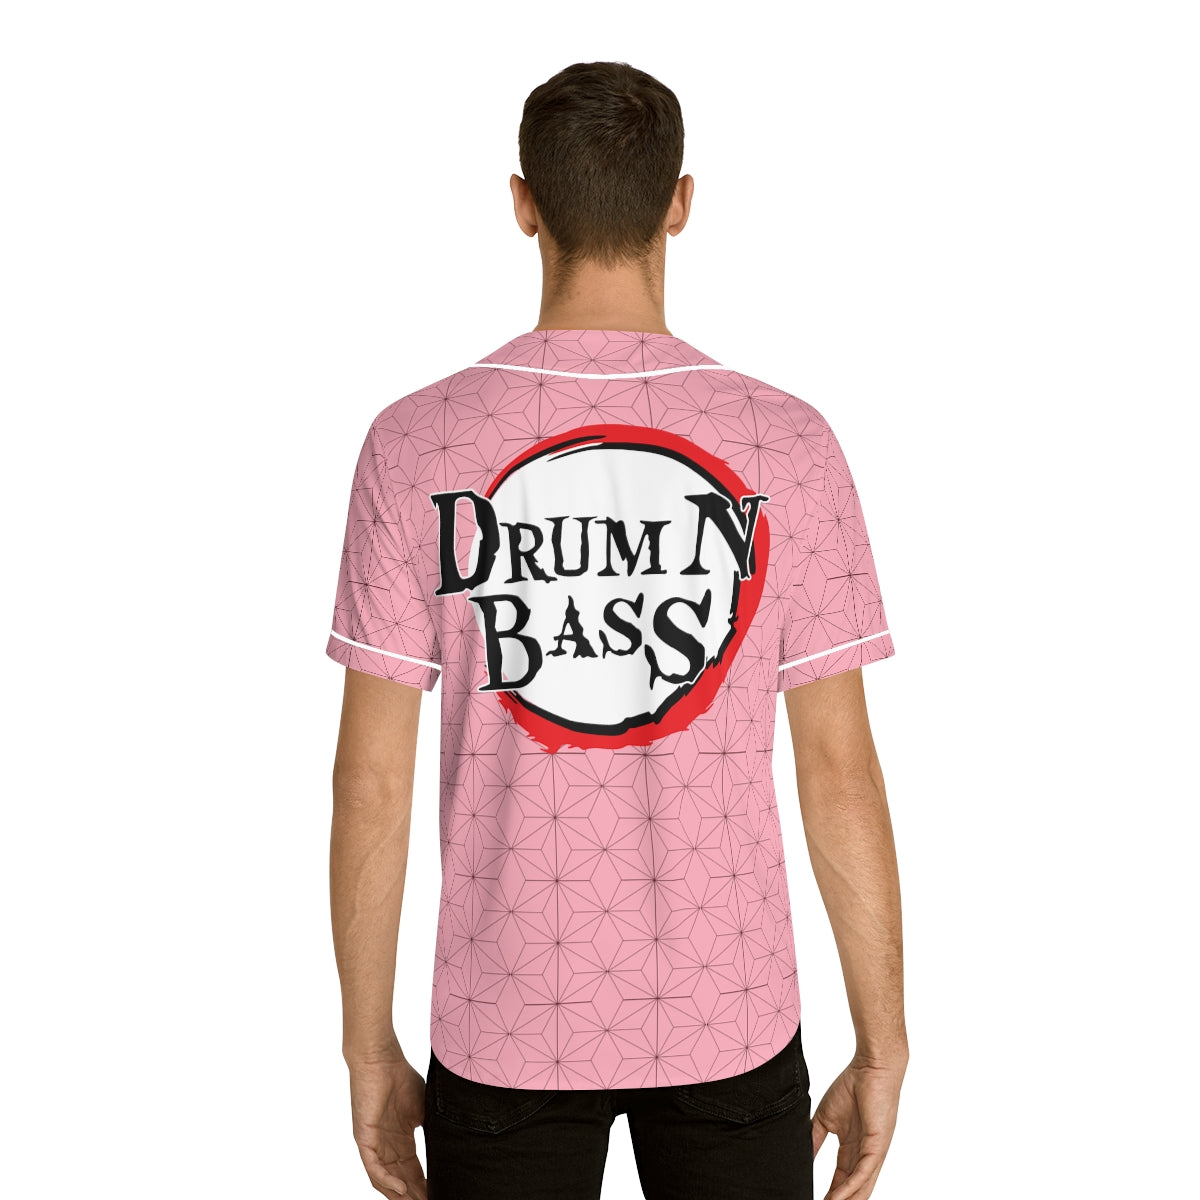 Drum and Bass V2 Jersey